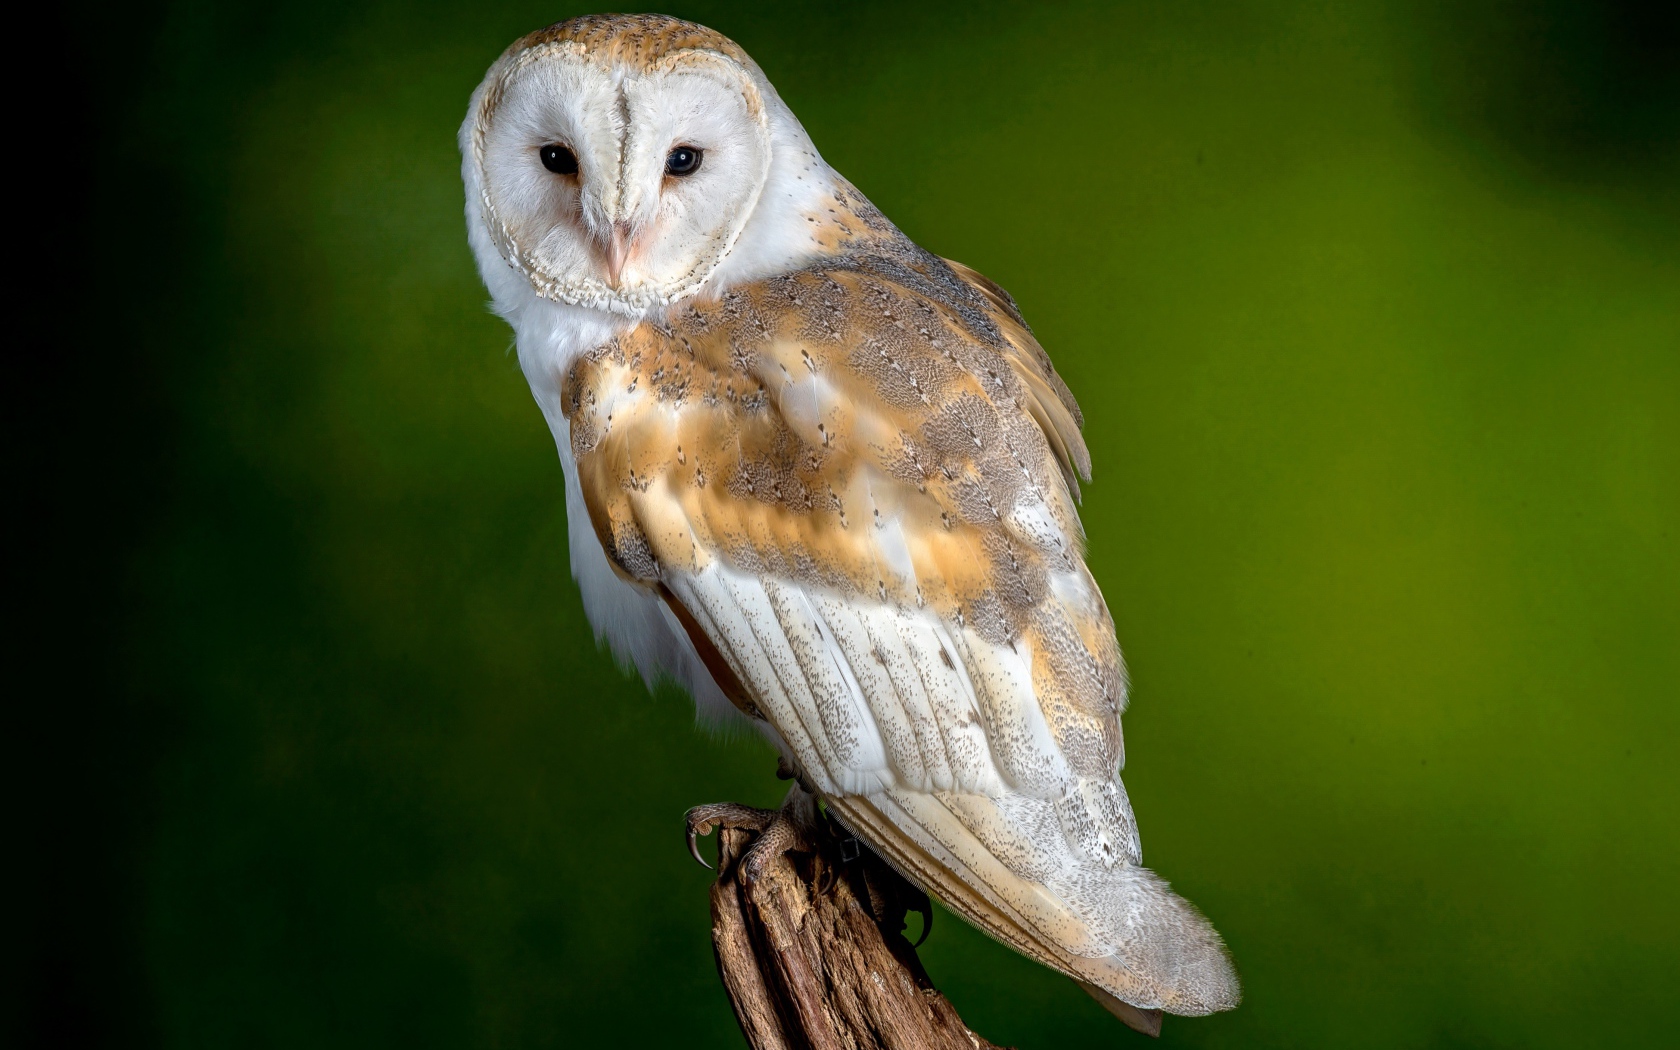 Big owl sits on a tree on a green background